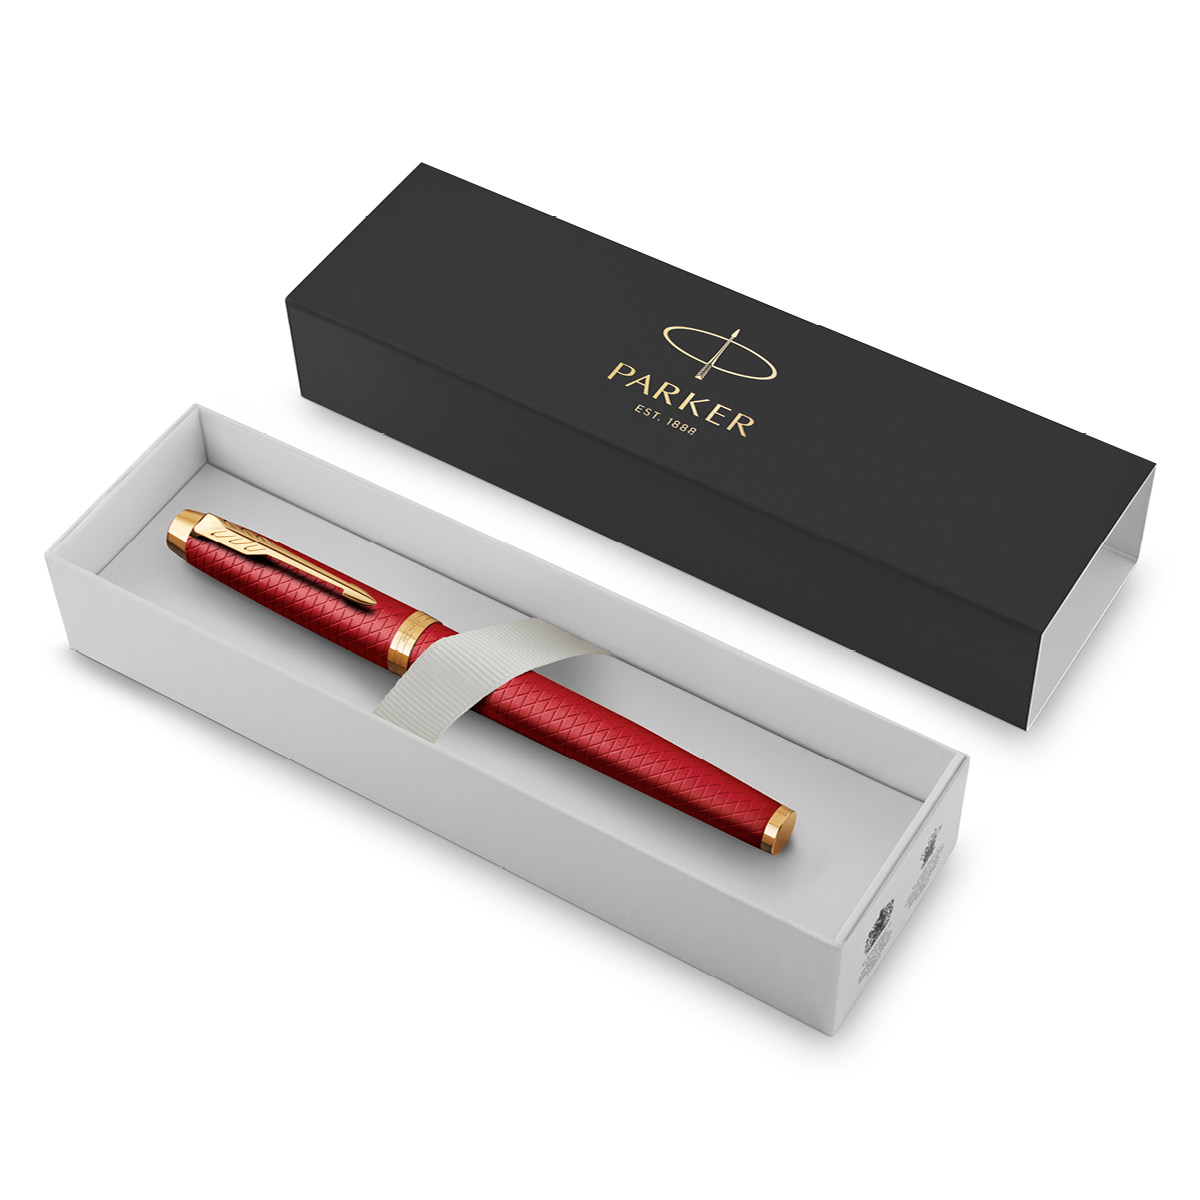 IM Premium Red/Gold Rollerball in the group Pens / Fine Writing / Gift Pens at Pen Store (112691)